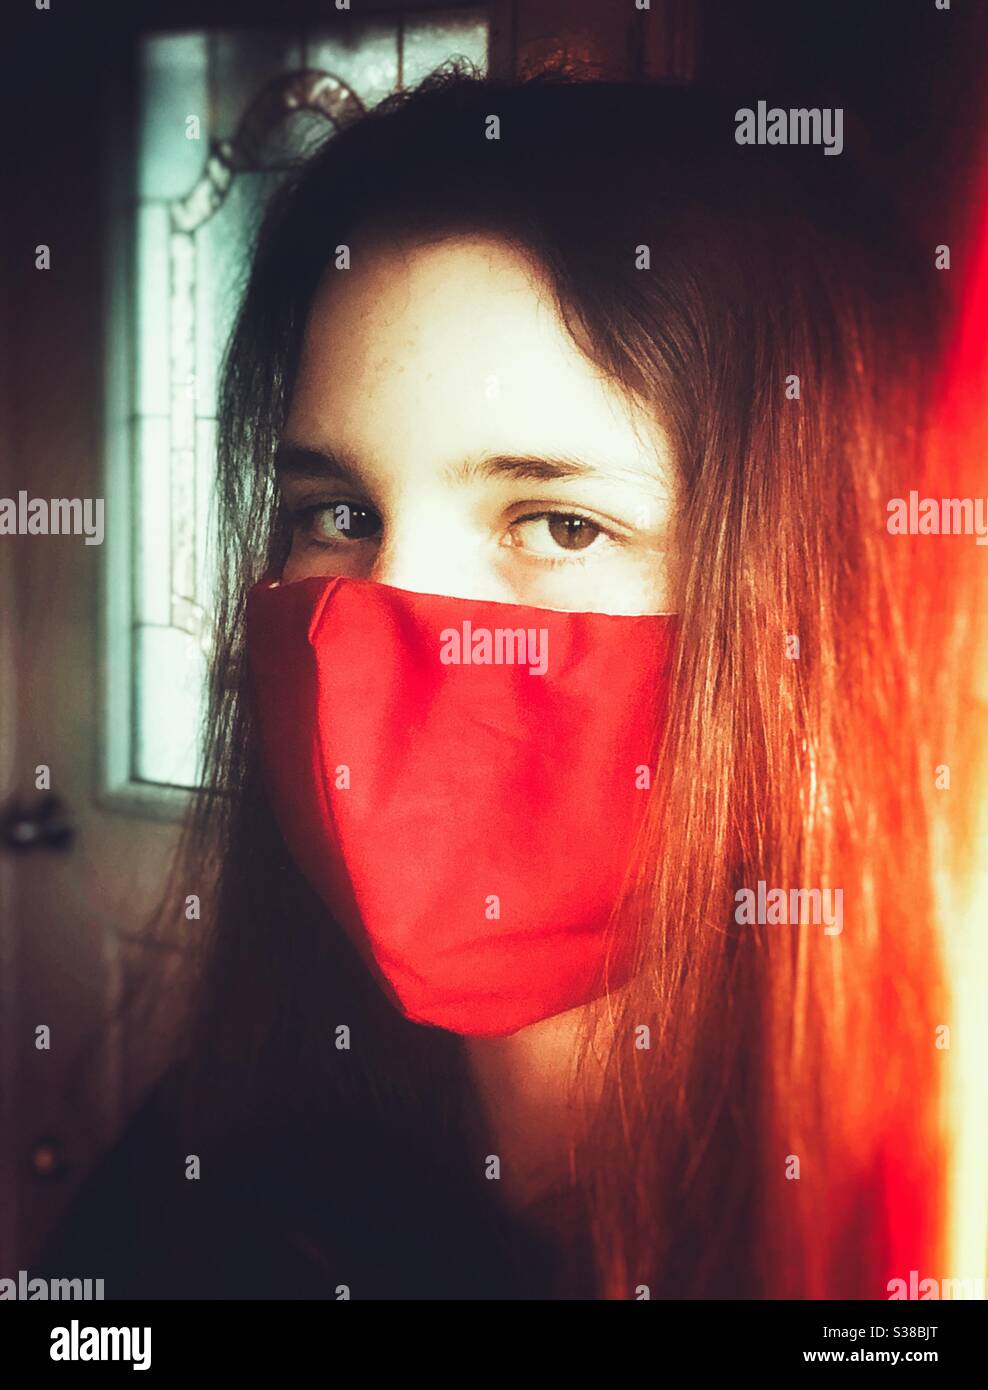 Teen girl wearing red, cotton homemade face mask Stock Photo